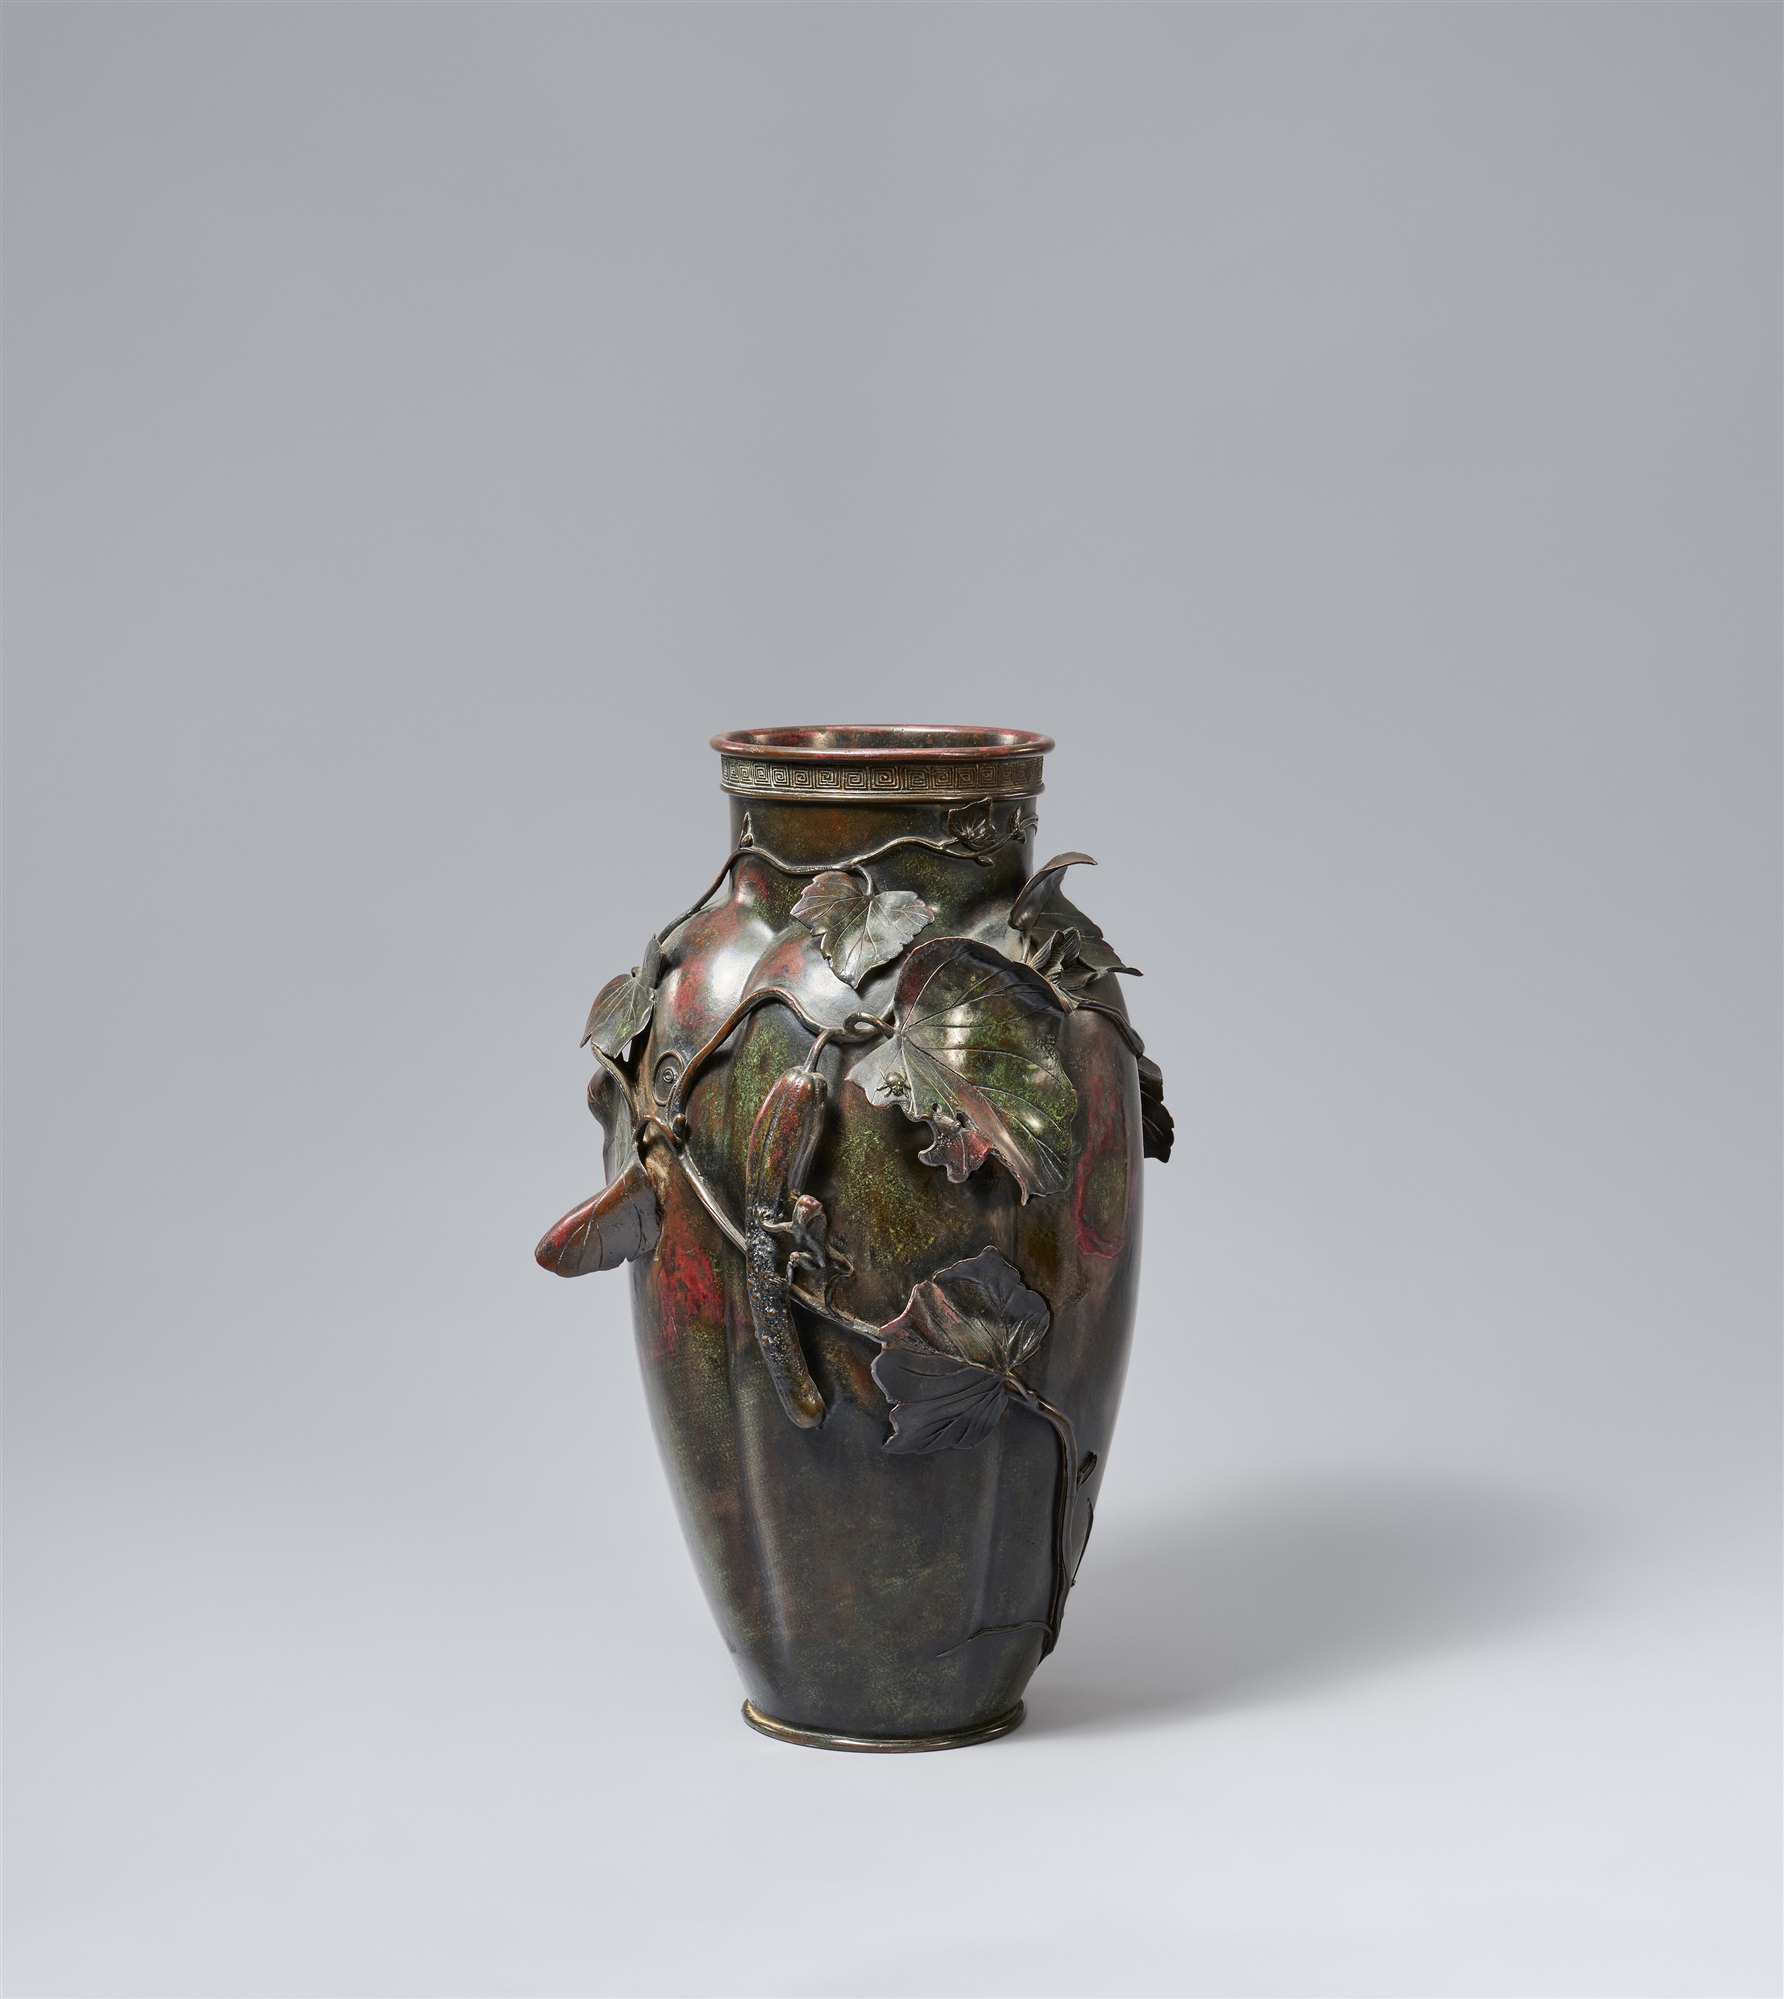 A large melon-shaped bronze vase. Late 19th century